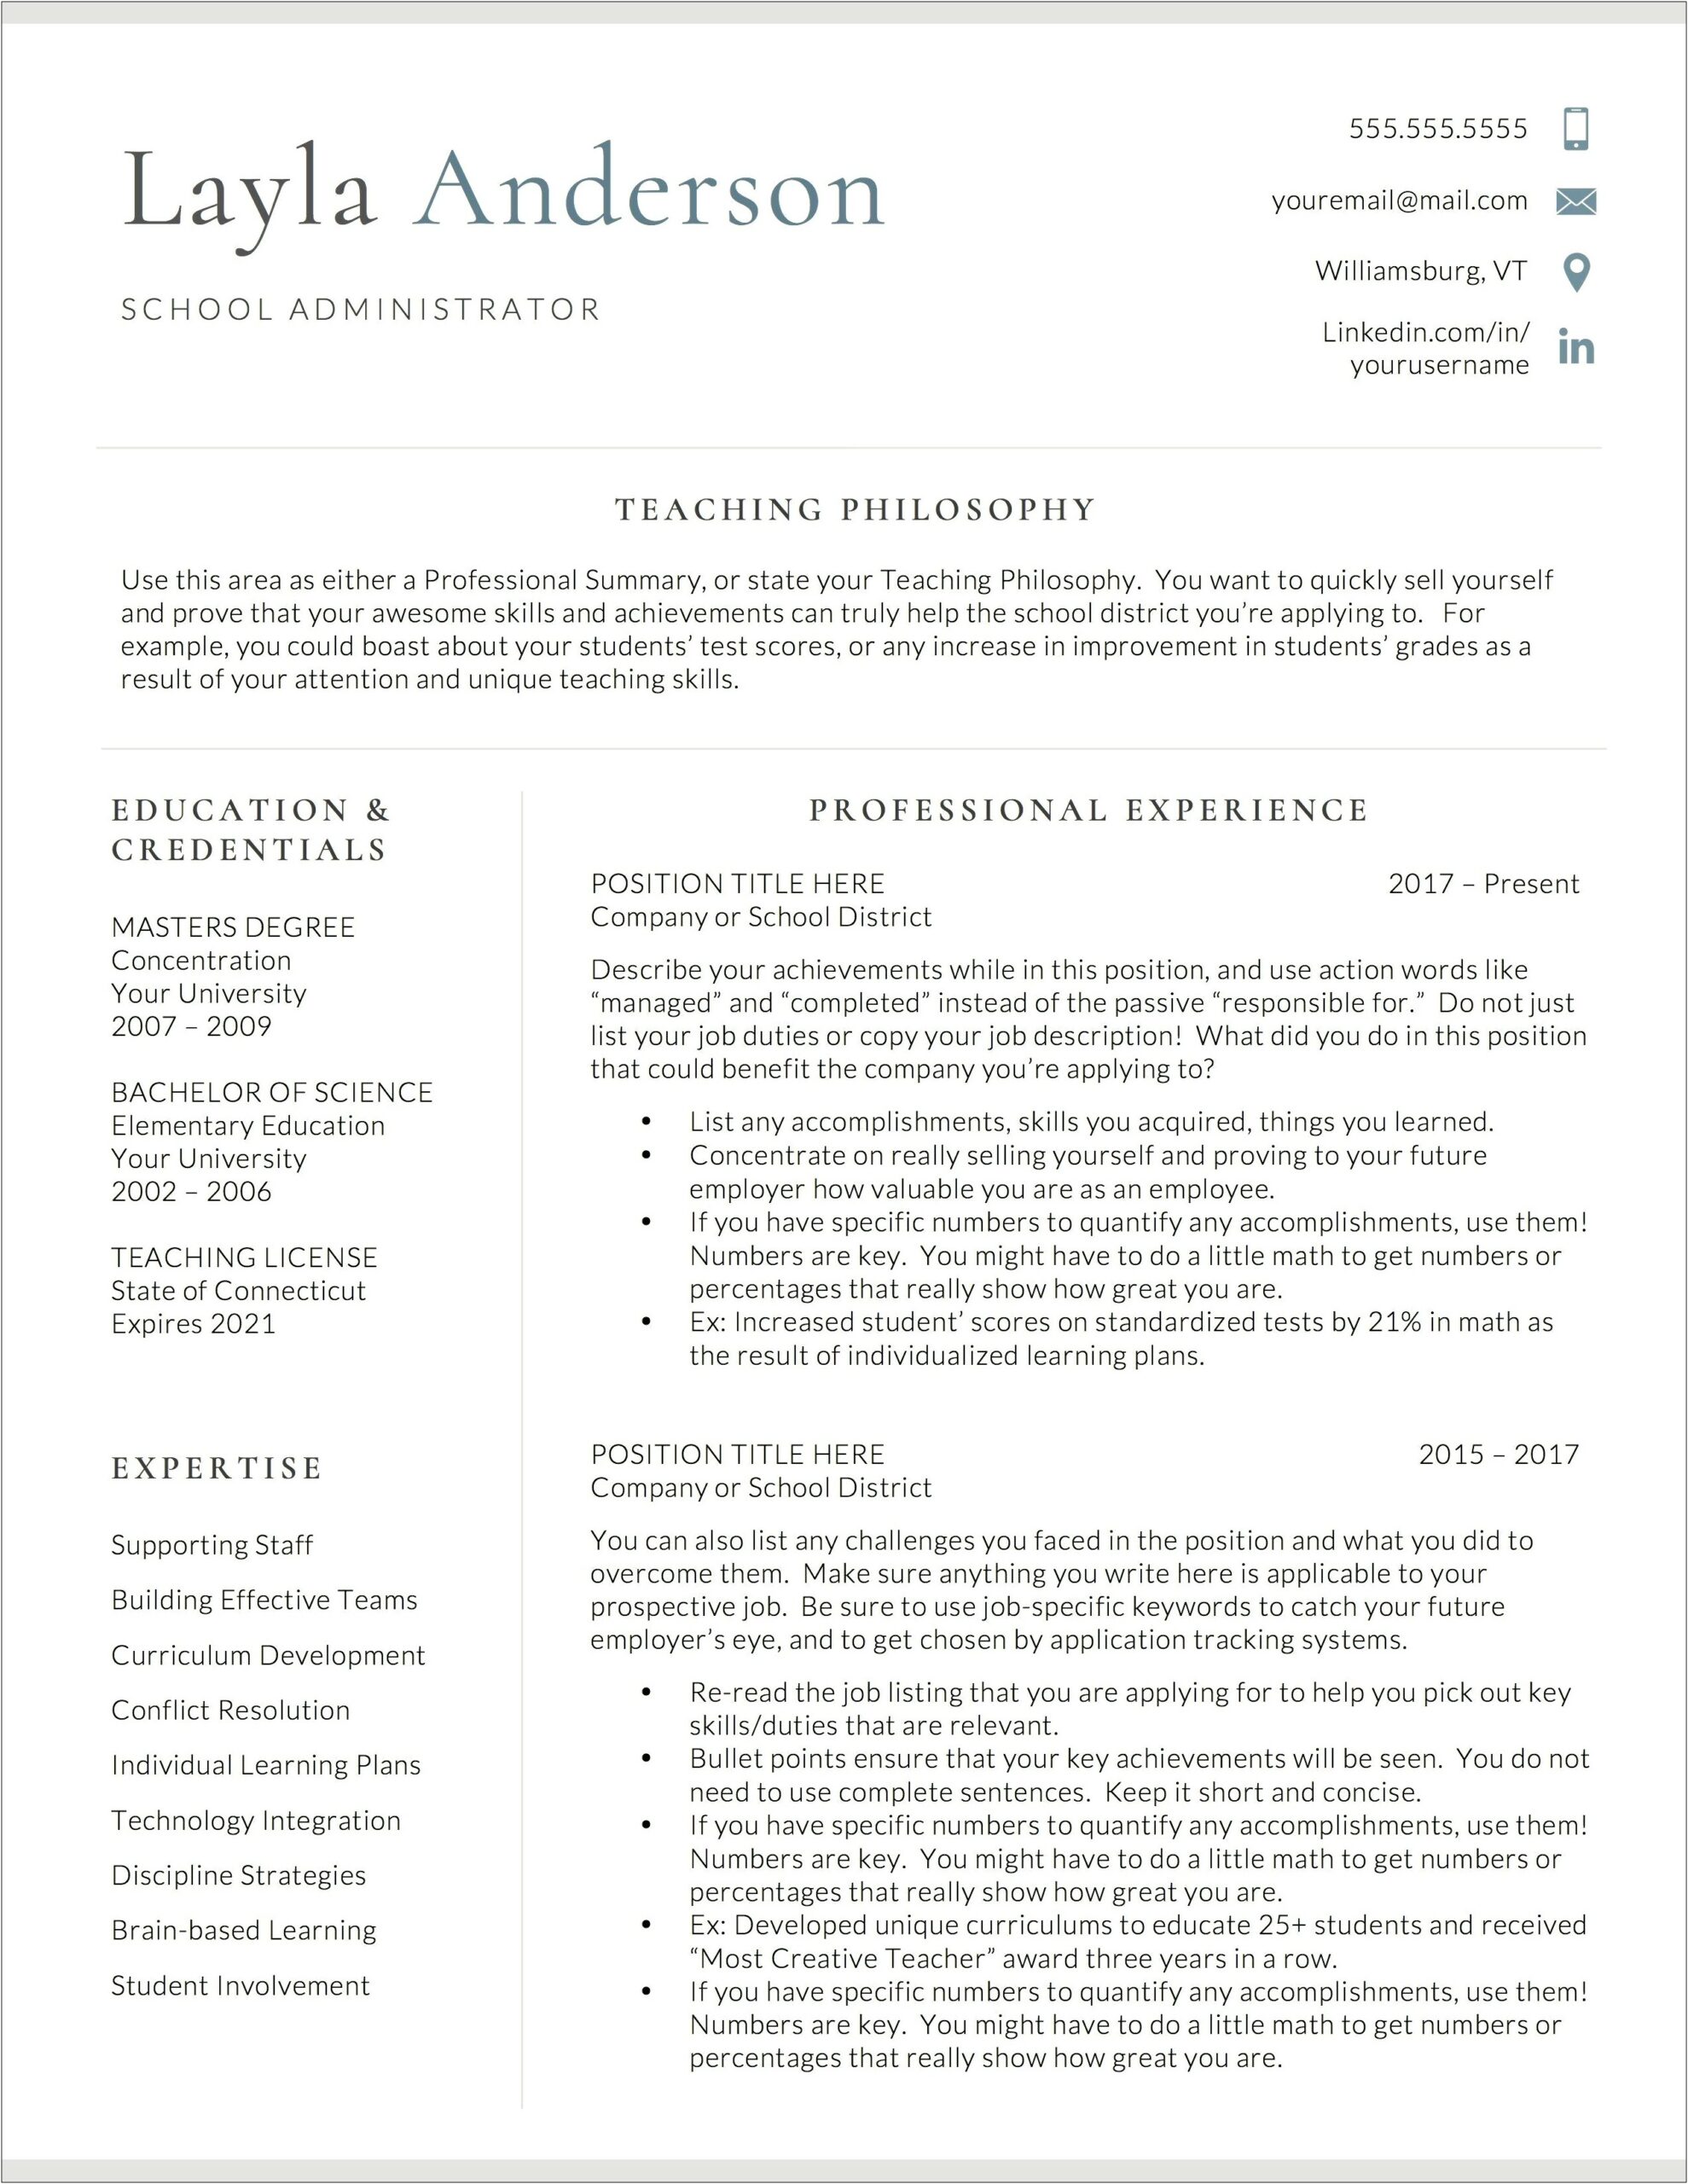 Sample Resume Action Statements For Teachers